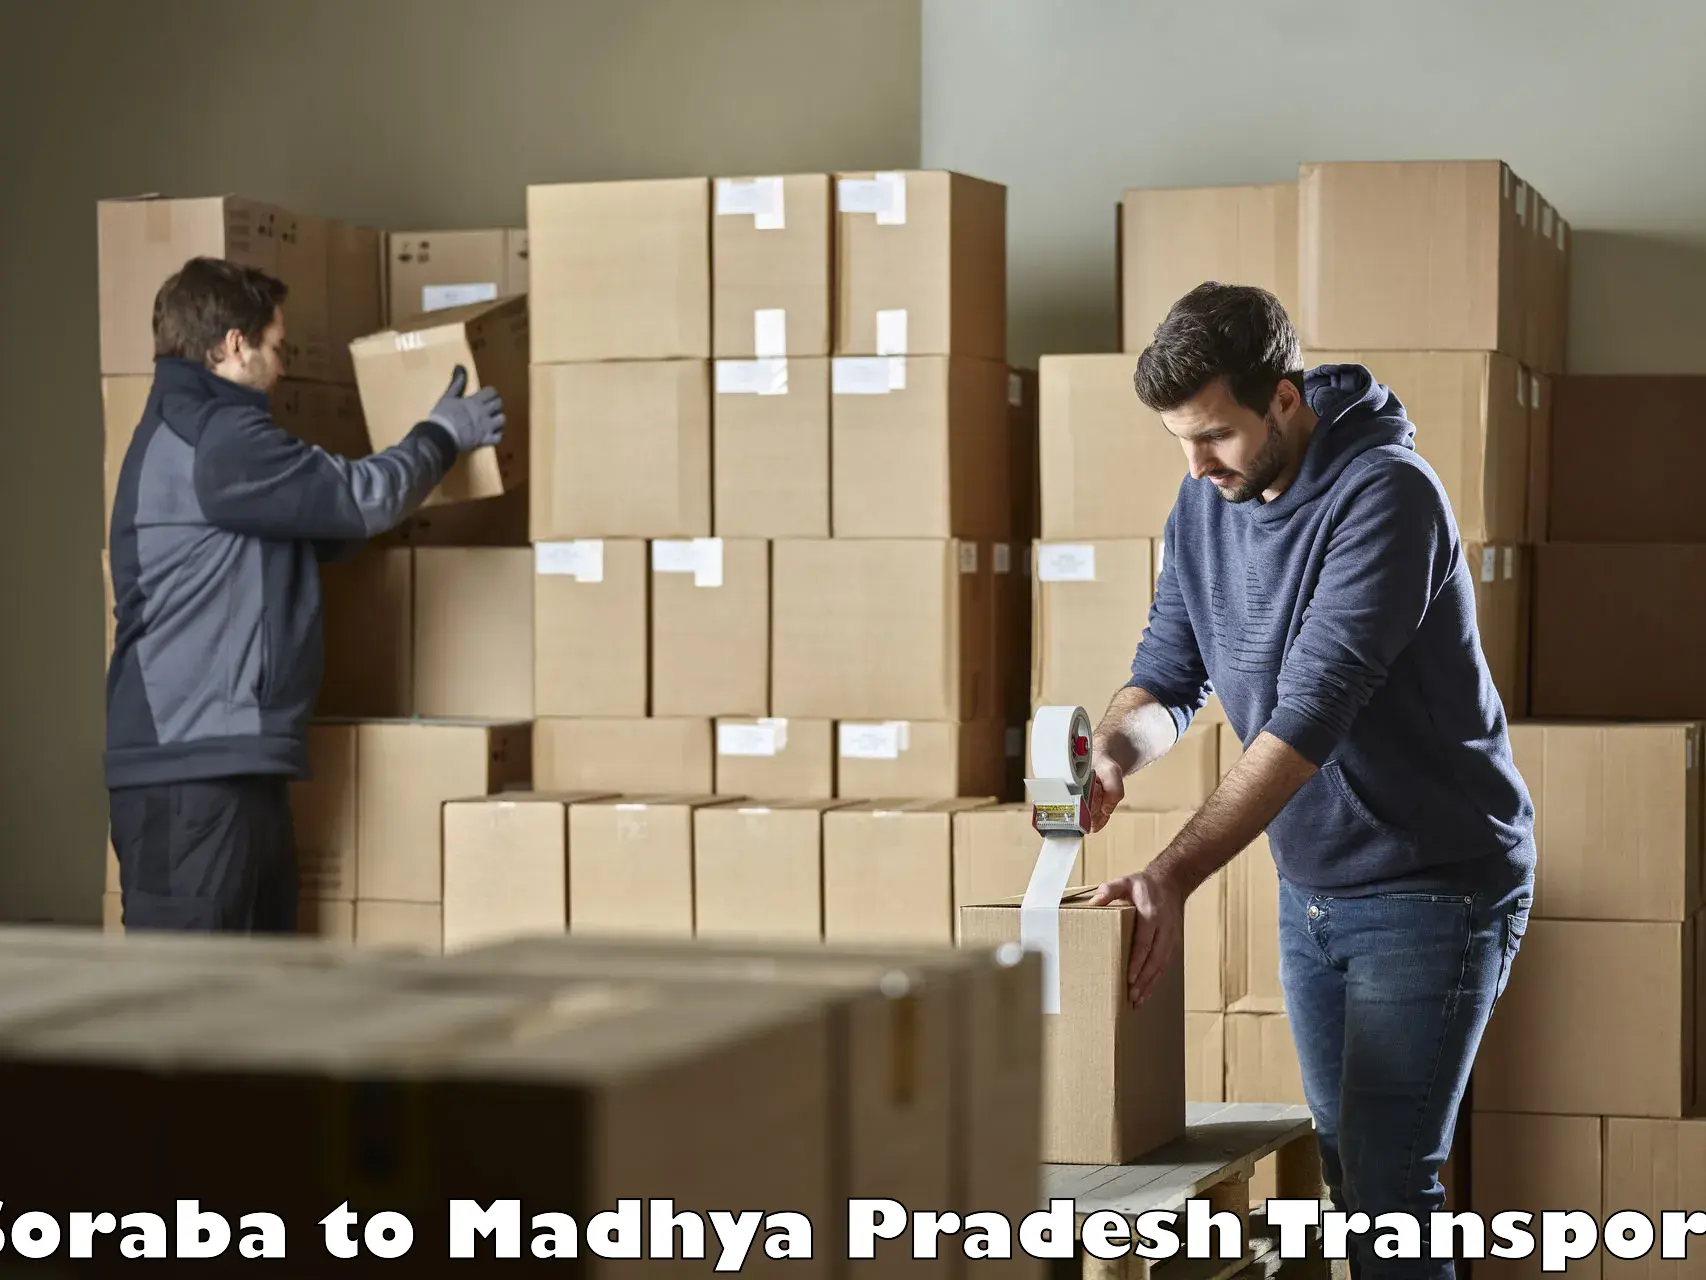 Truck transport companies in India Soraba to Bhopal